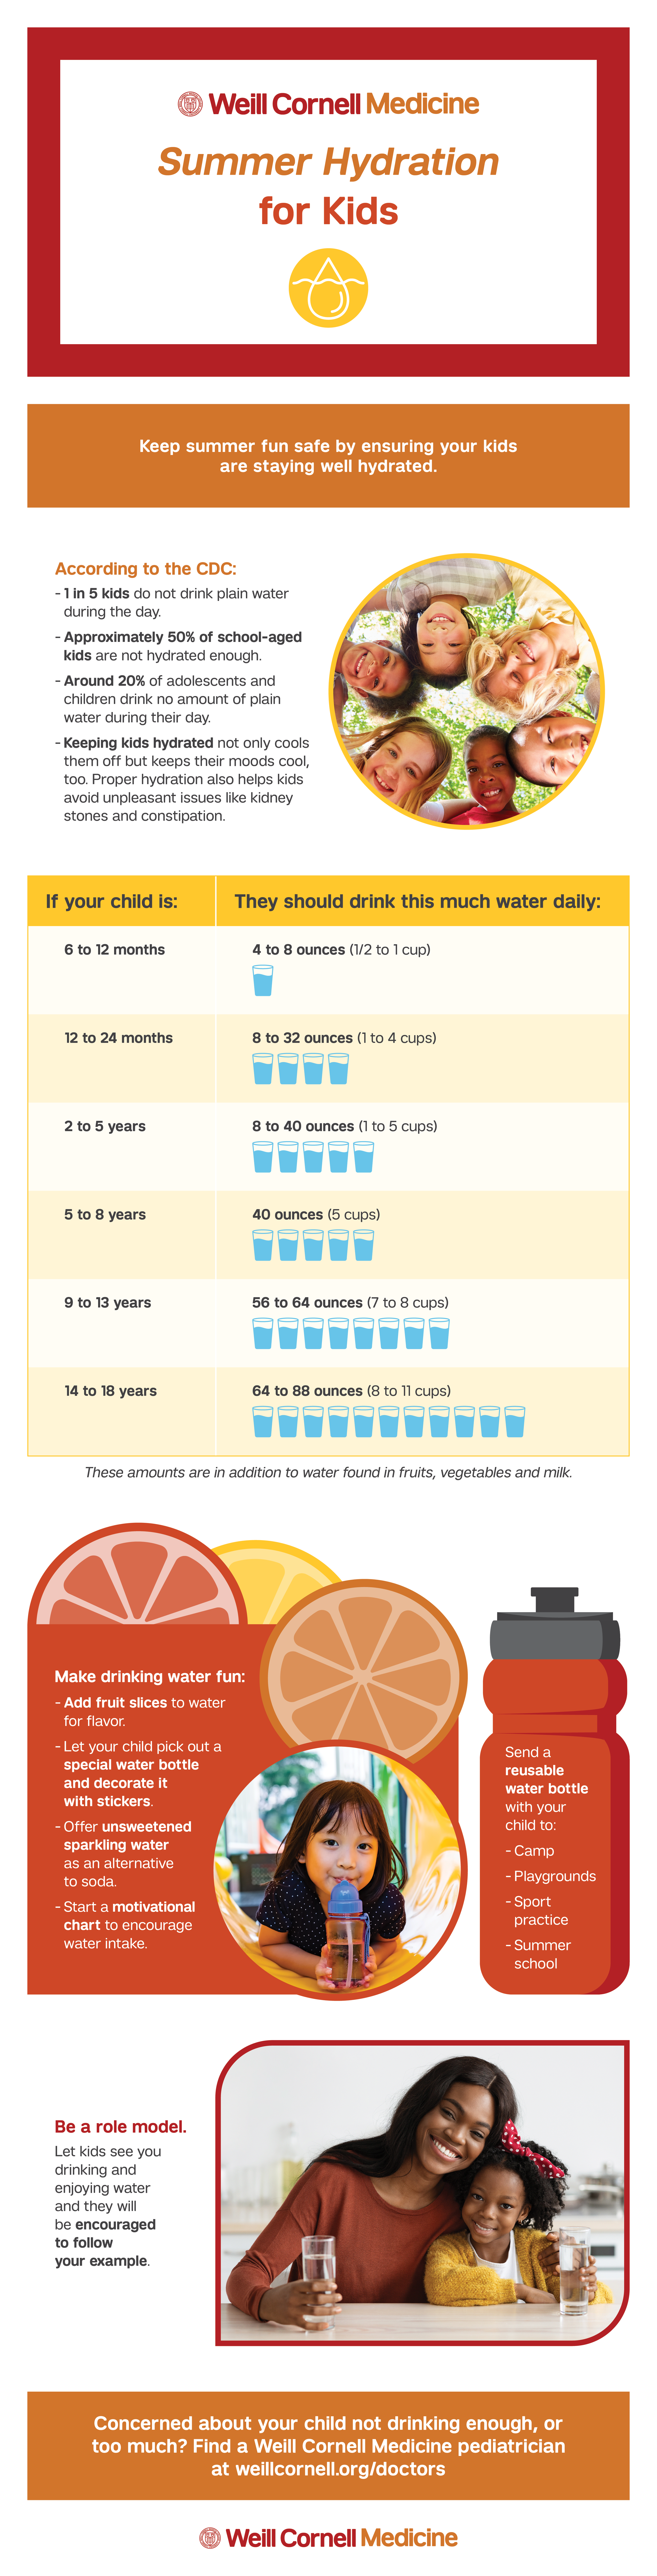 summer hydration for kids